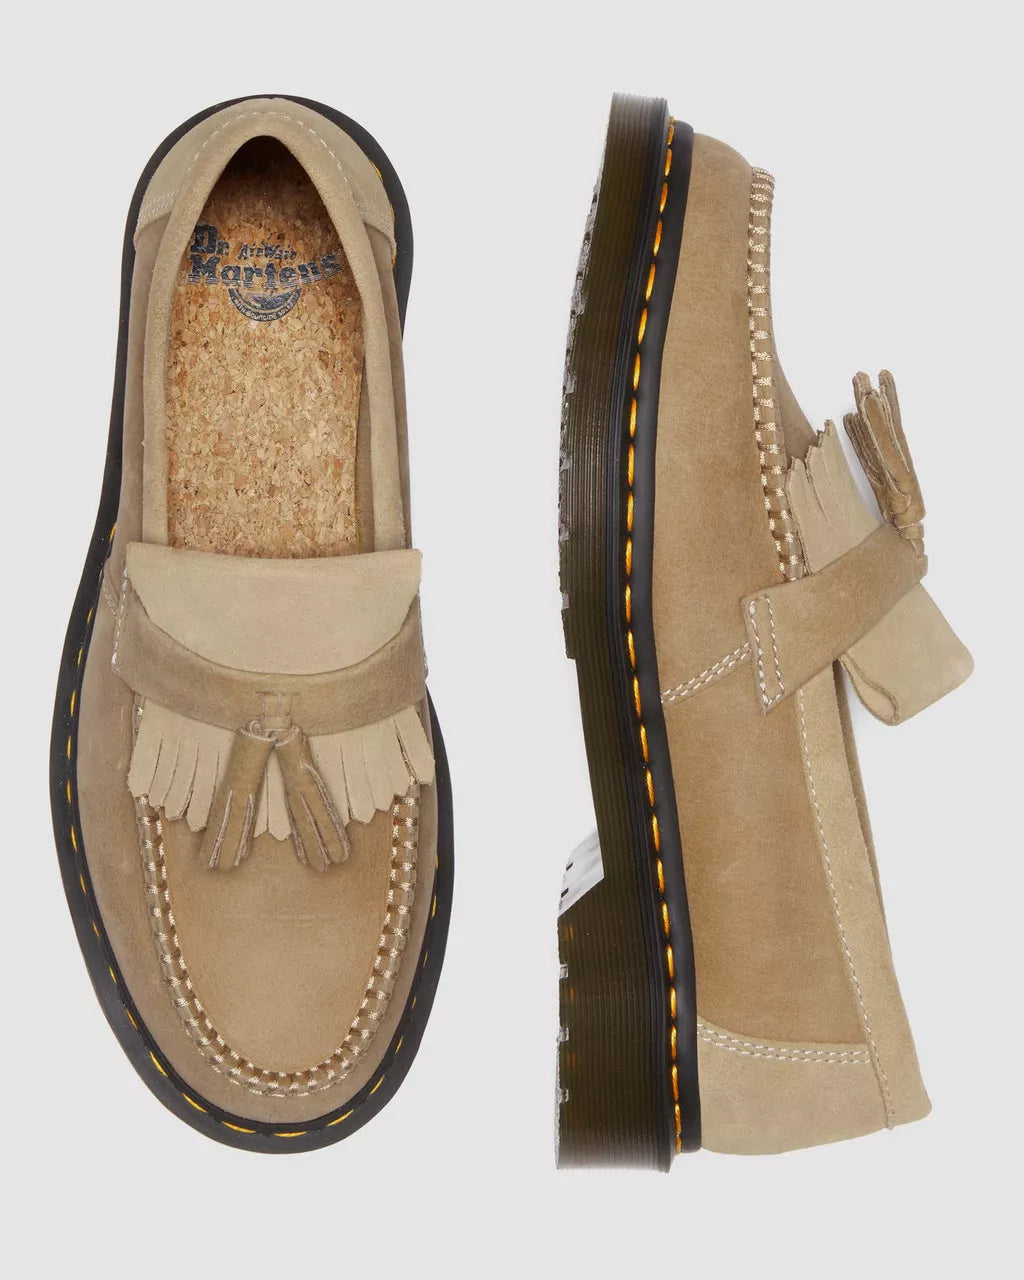 Dr. Martens "Adrian Tumbled Nubuck +EH Suede Loafers" M - Savannah Tan